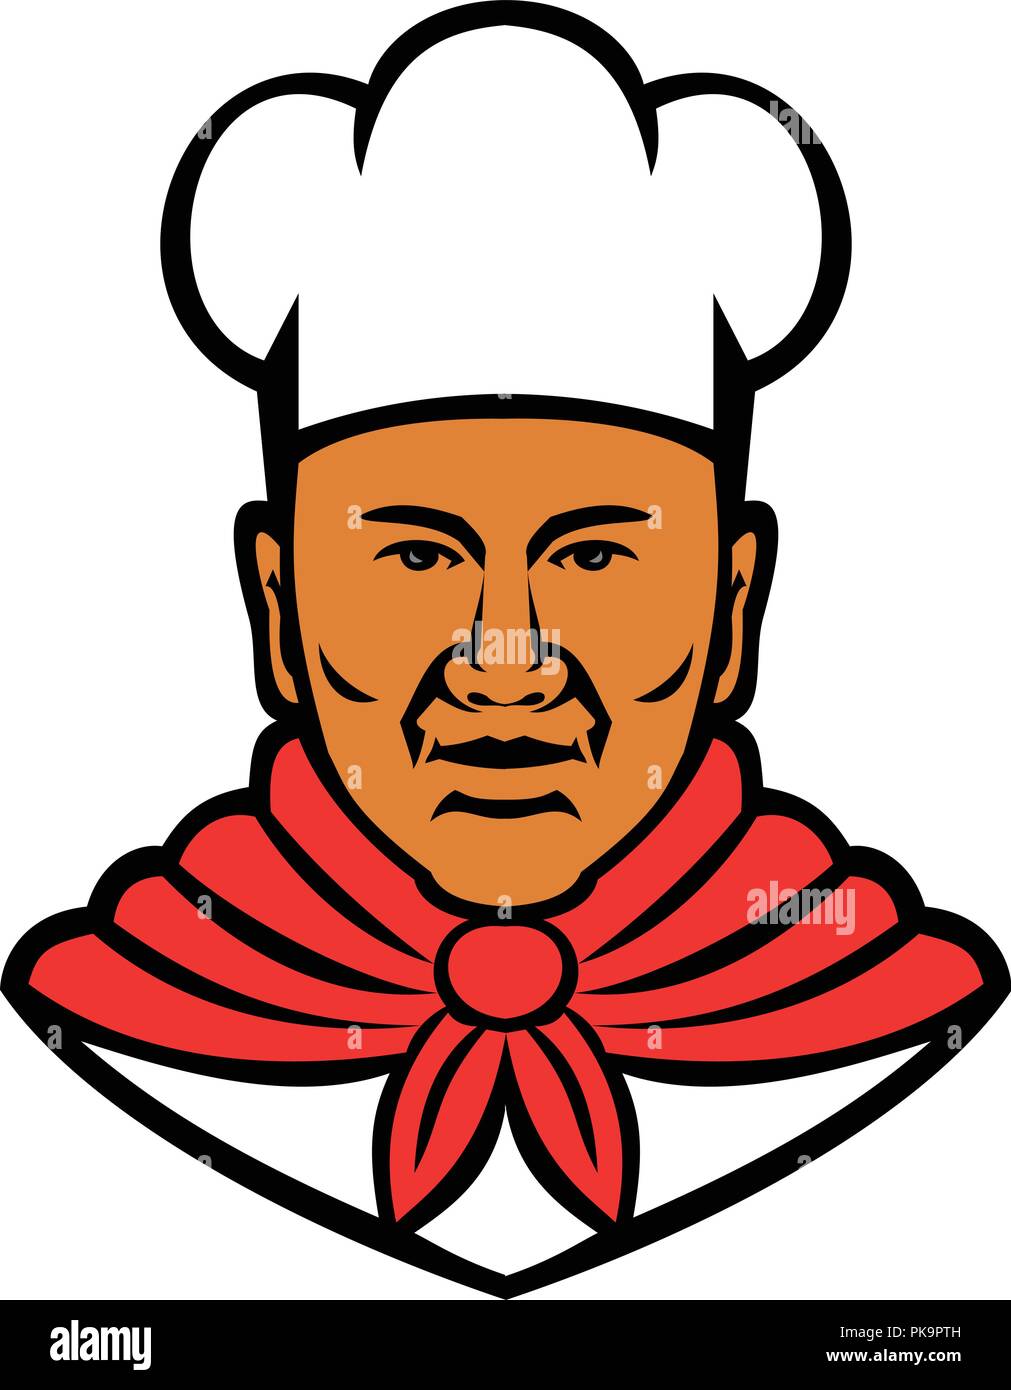 Mascot illustration of head of a black African American baker, chef or cook viewed from front on isolated white background done in retro style. Stock Vector